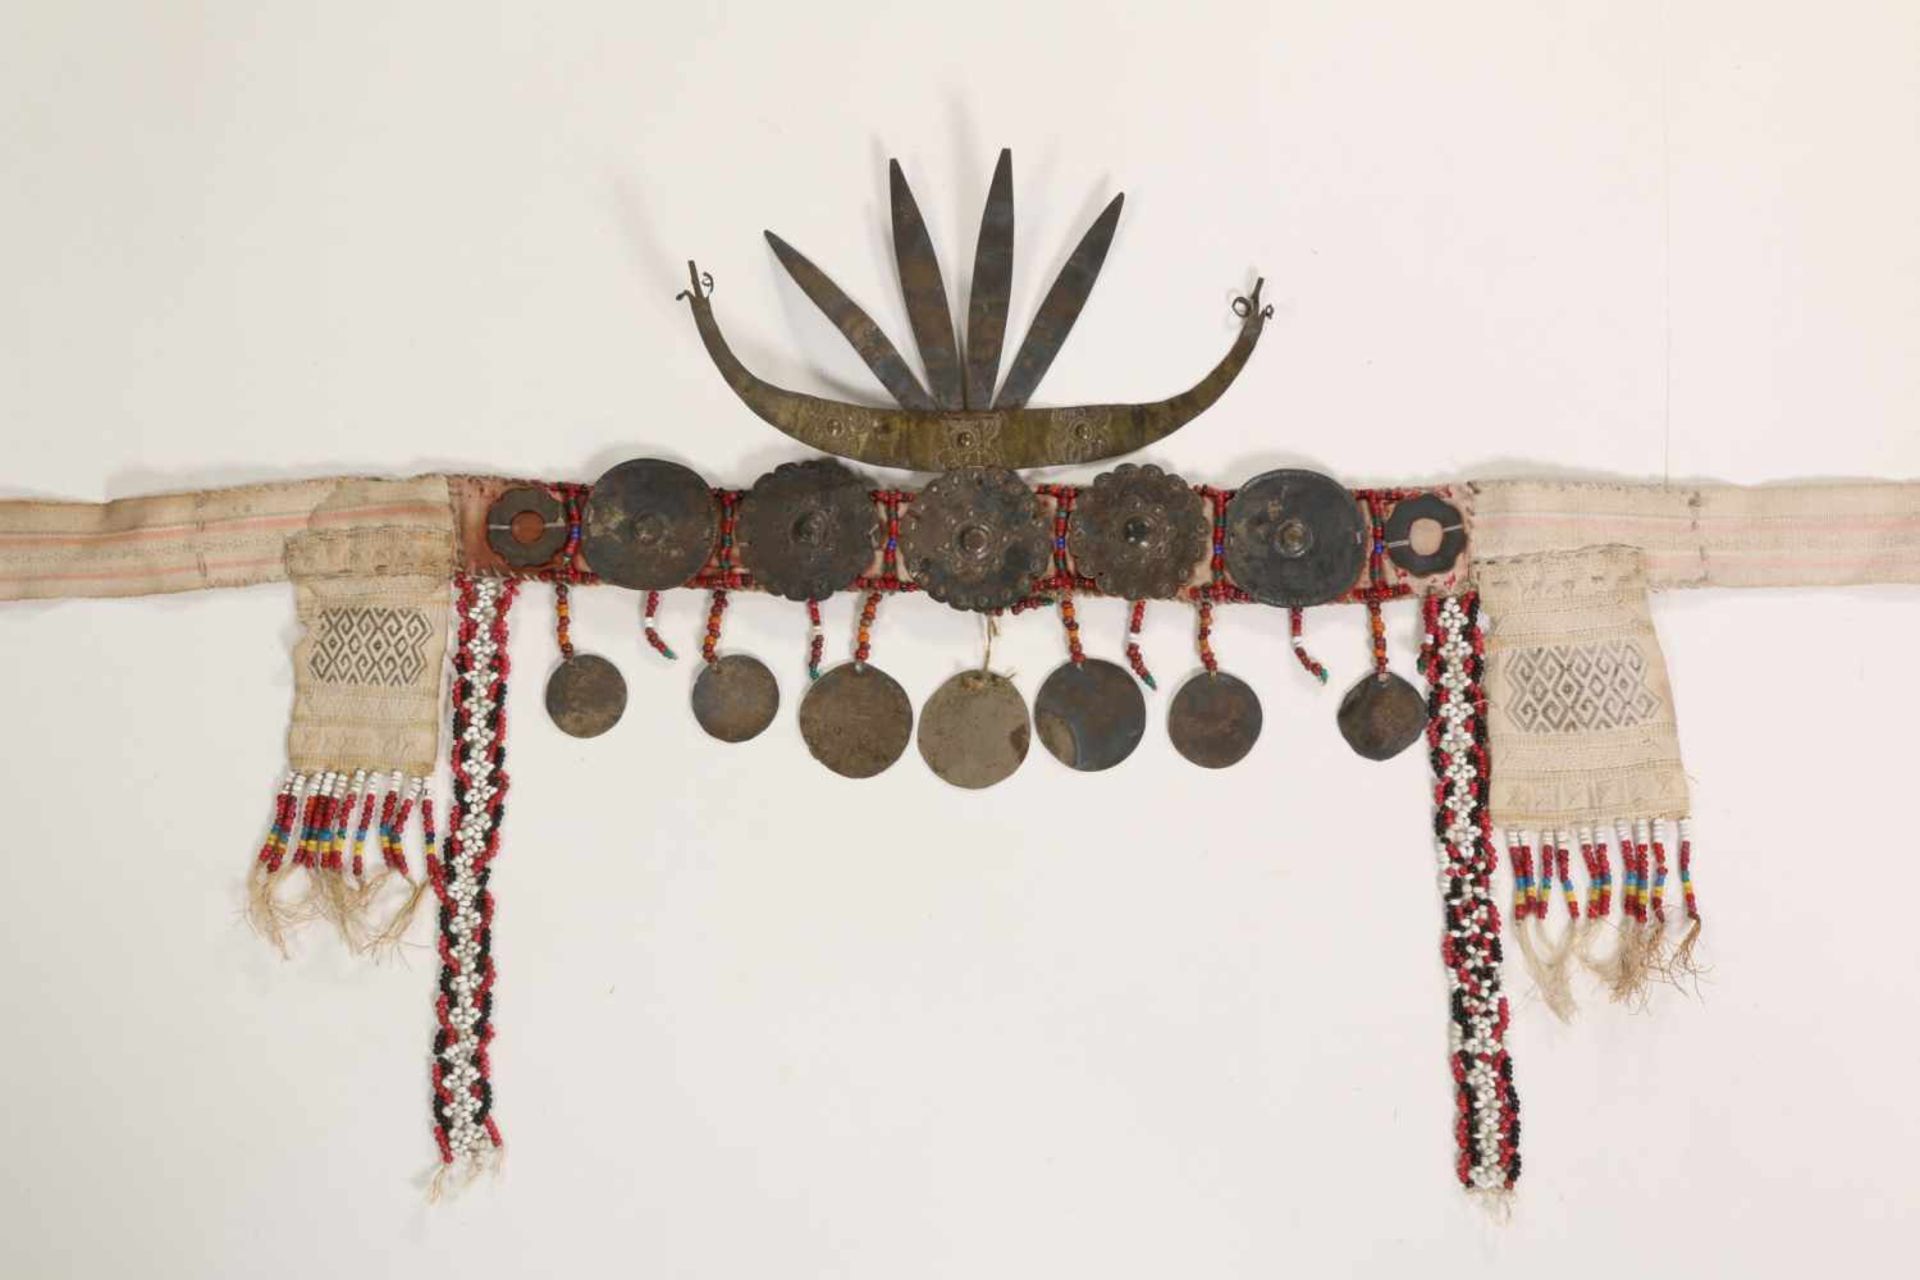 Timor, headhunters jewellery;woven textile with beads and metal ornaments and crown, h. 17 cm. [1] - Bild 3 aus 3